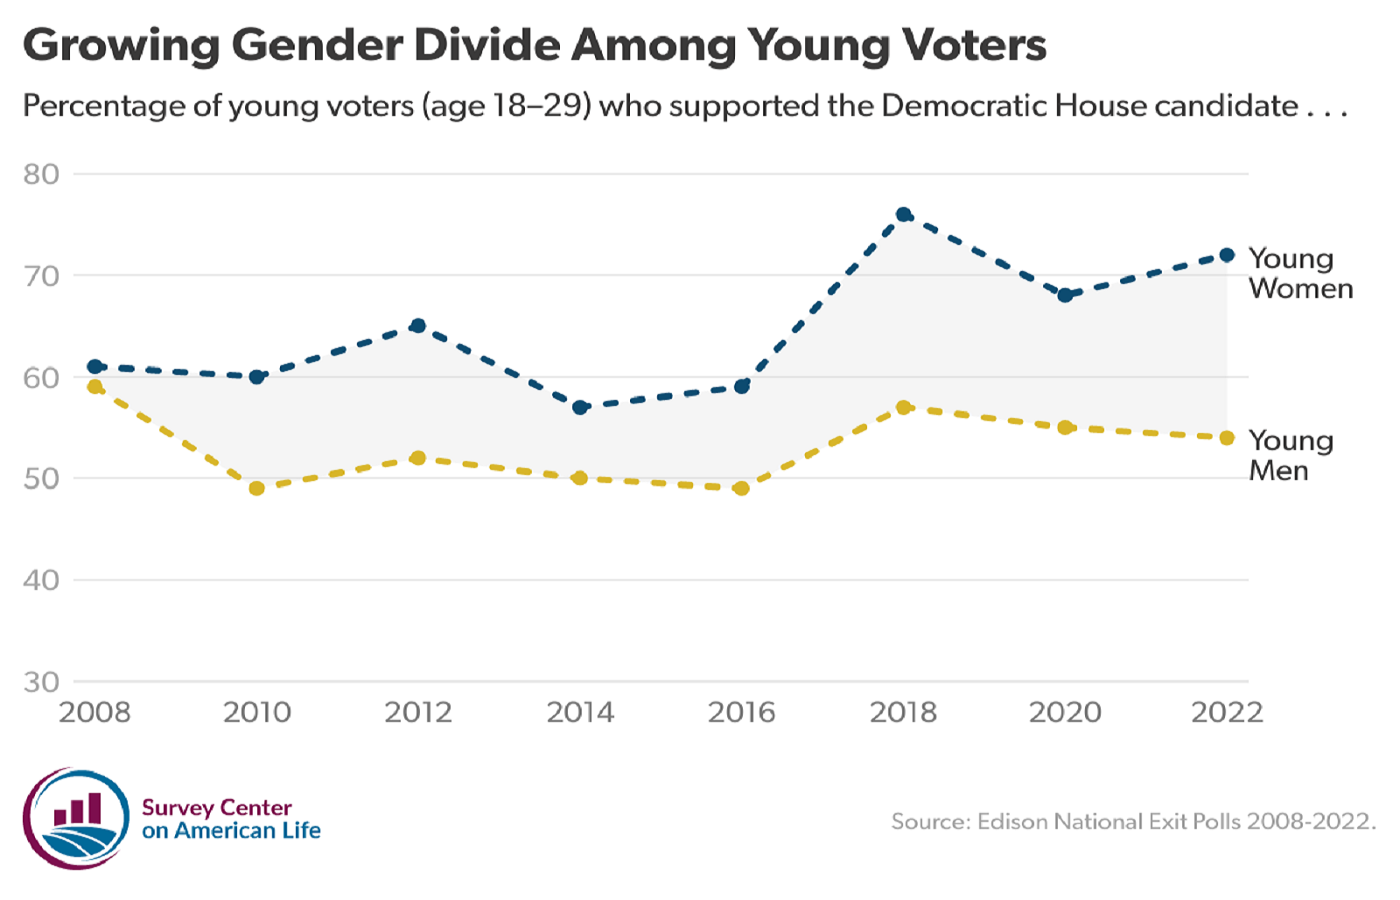 Line chart showing percentage of Democratic vote for women and men age 18-29.